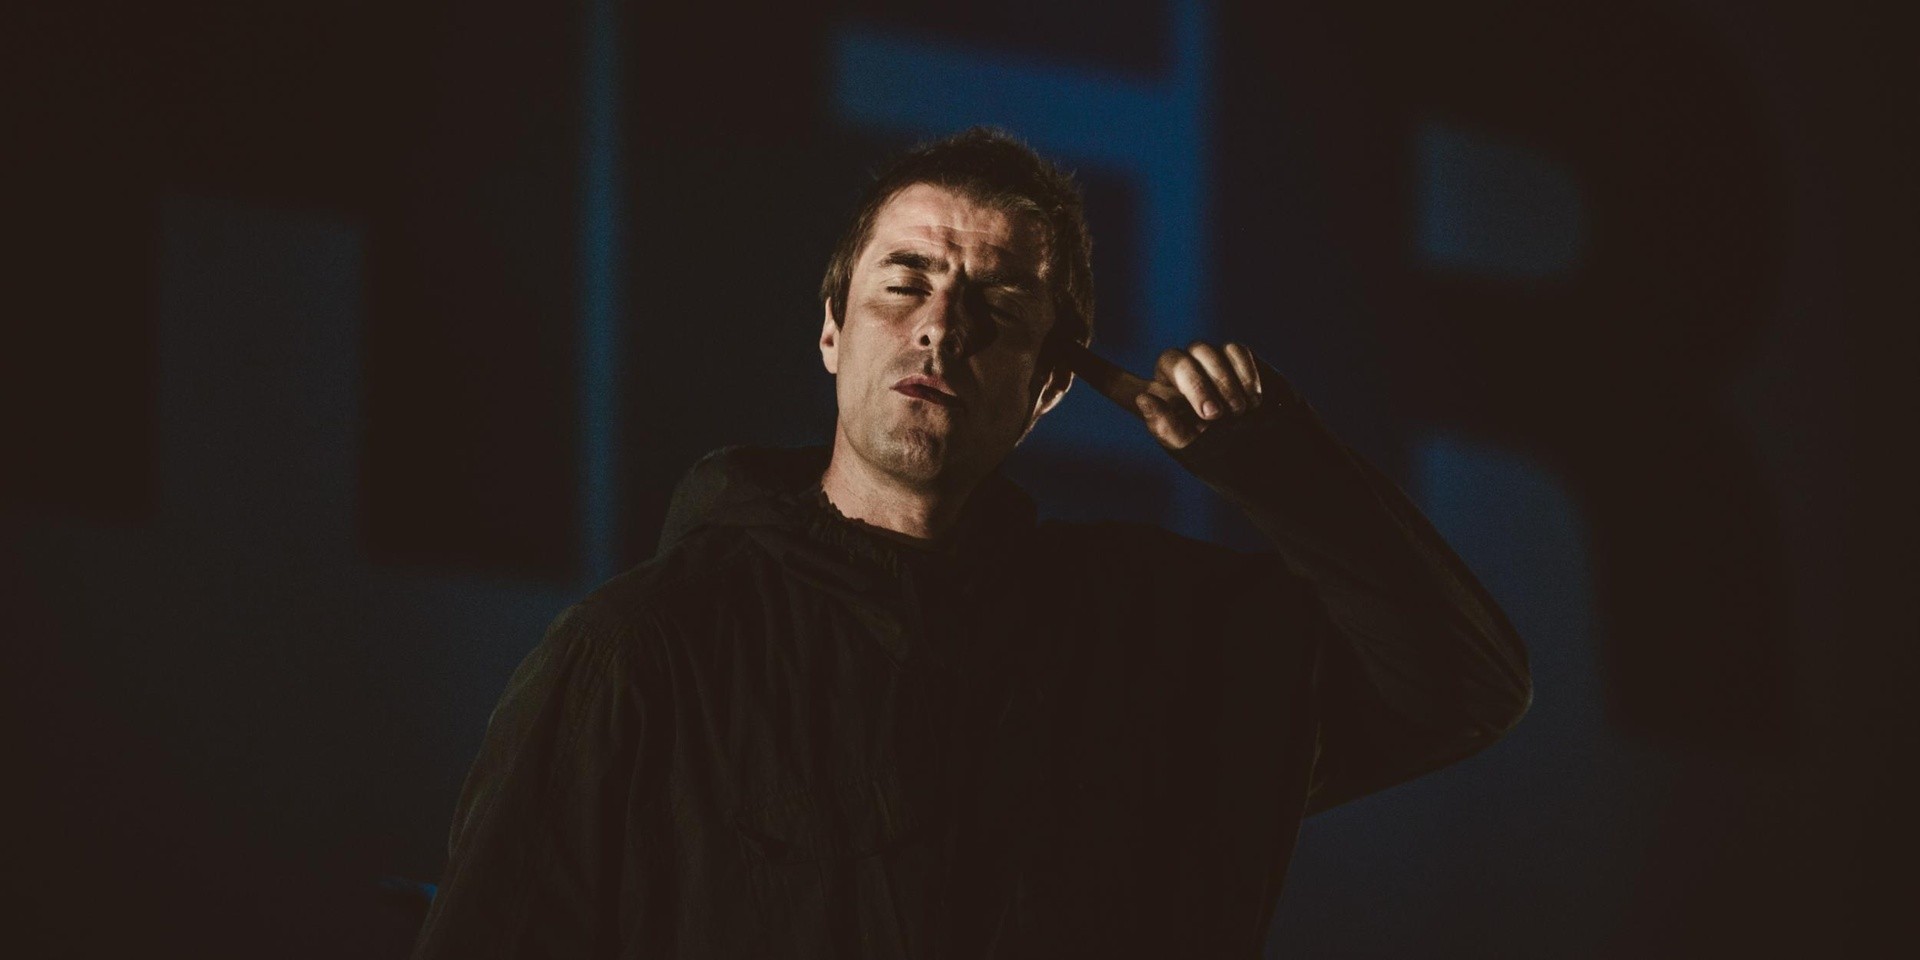 Liam Gallagher's As It Was documentary gets first teaser trailer – watch